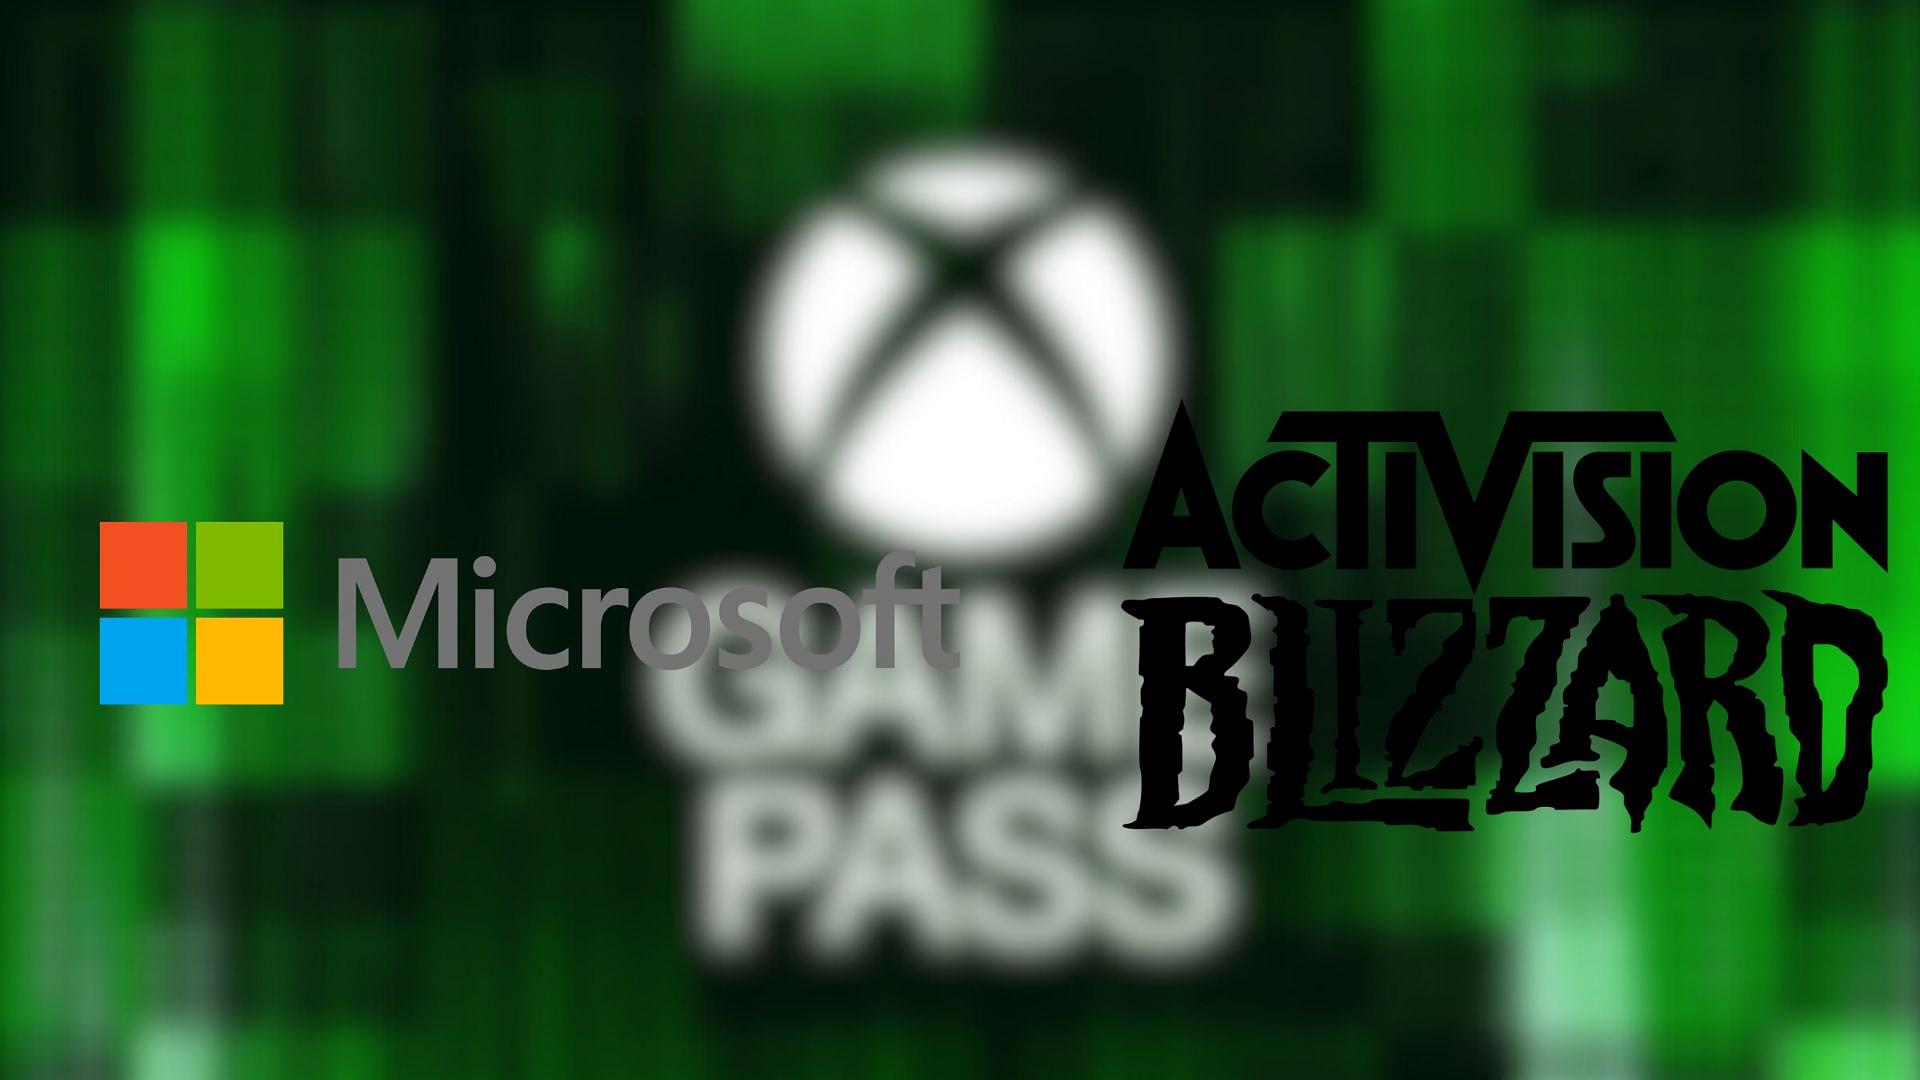 An illustration showing Microsoft and Activision-Blizzard logoes with Game Pass screen blurred in the background